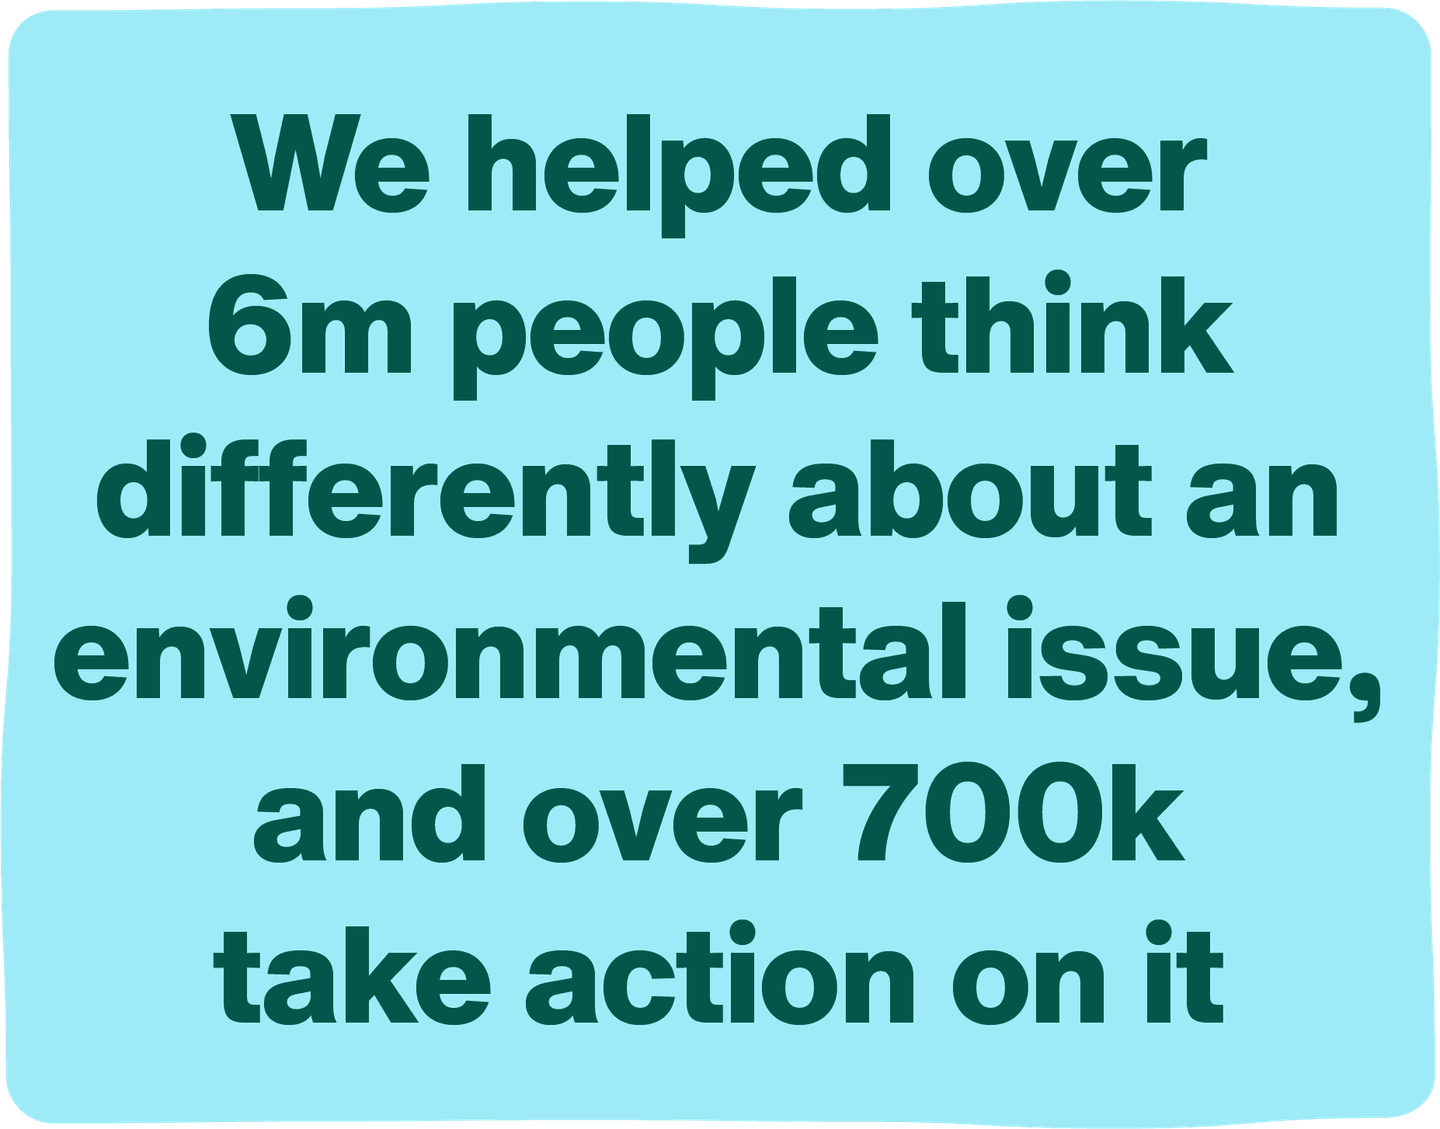 Stat: We helped over 6m people think differently about an environmental issue, and over 700k take action on it